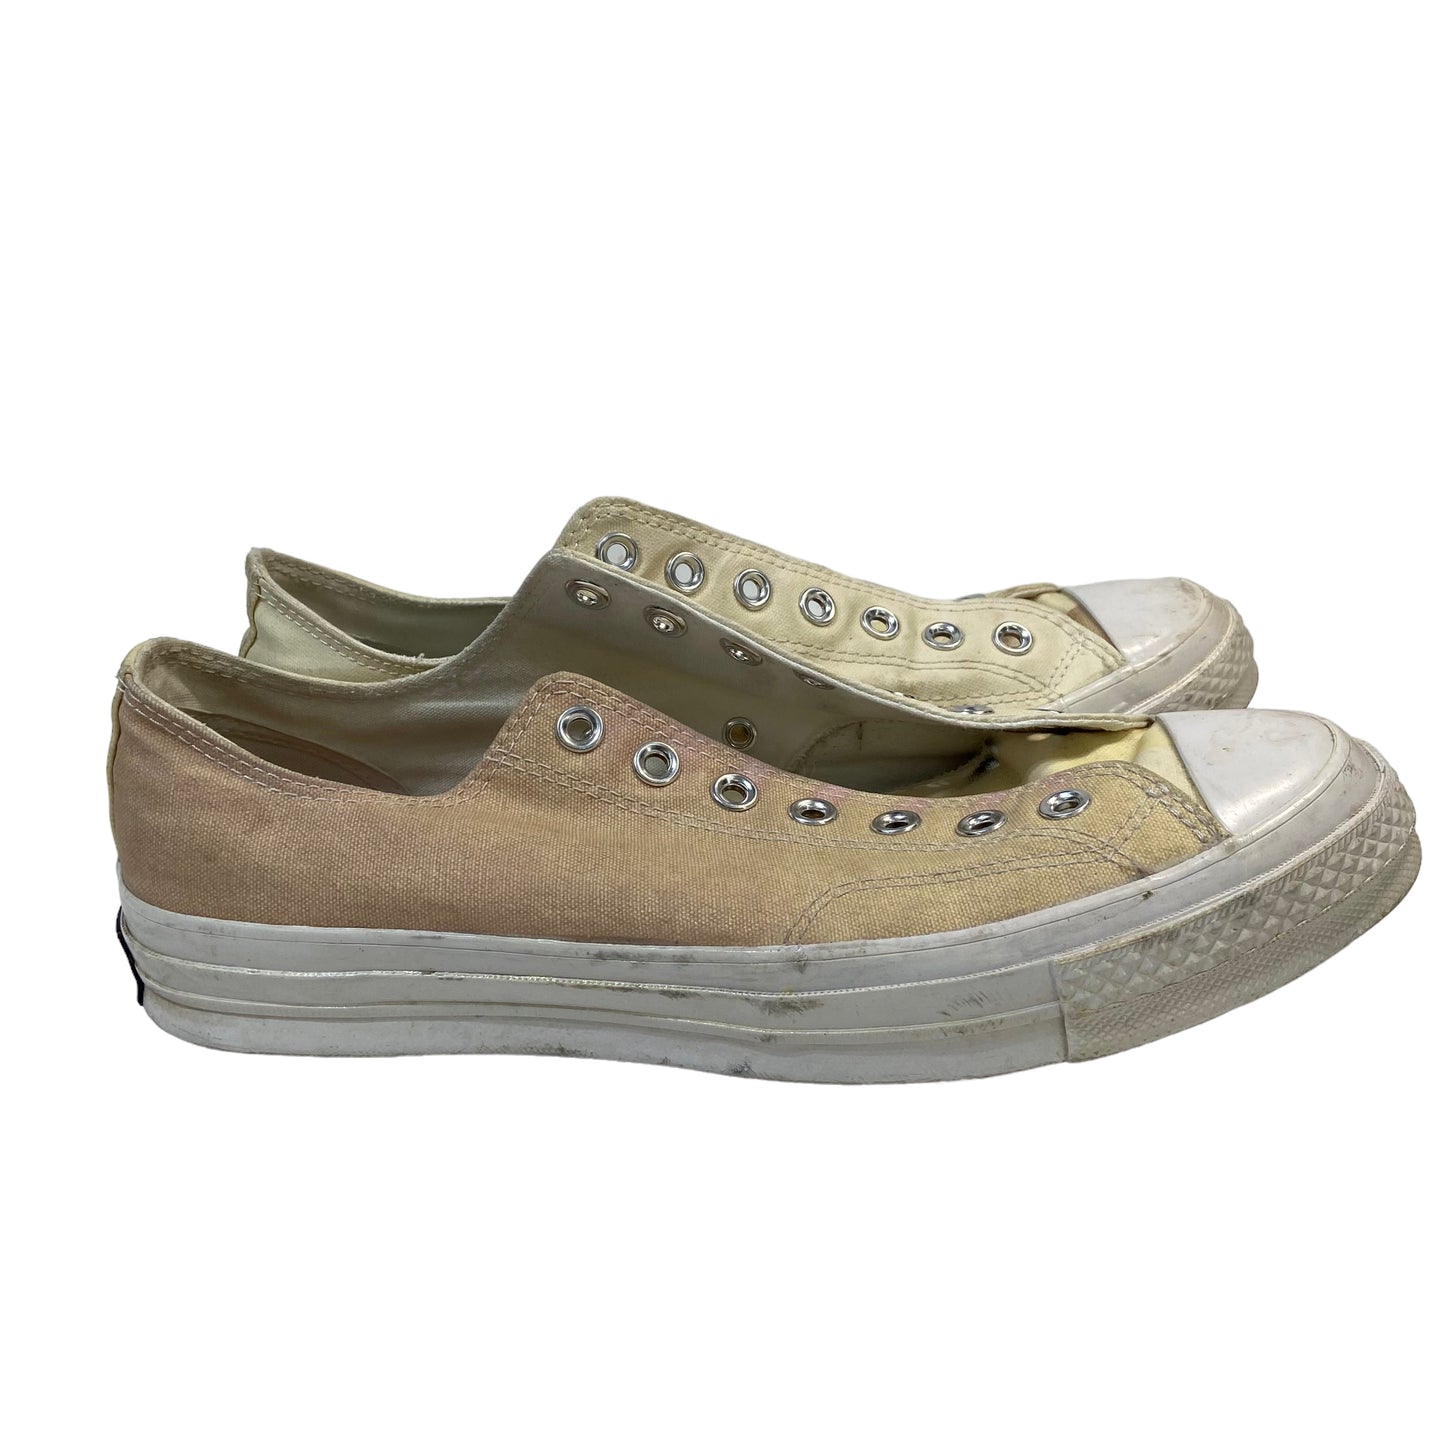 Converse X Chinatown Market Converse All Star Low Men's Shoes - Size 9